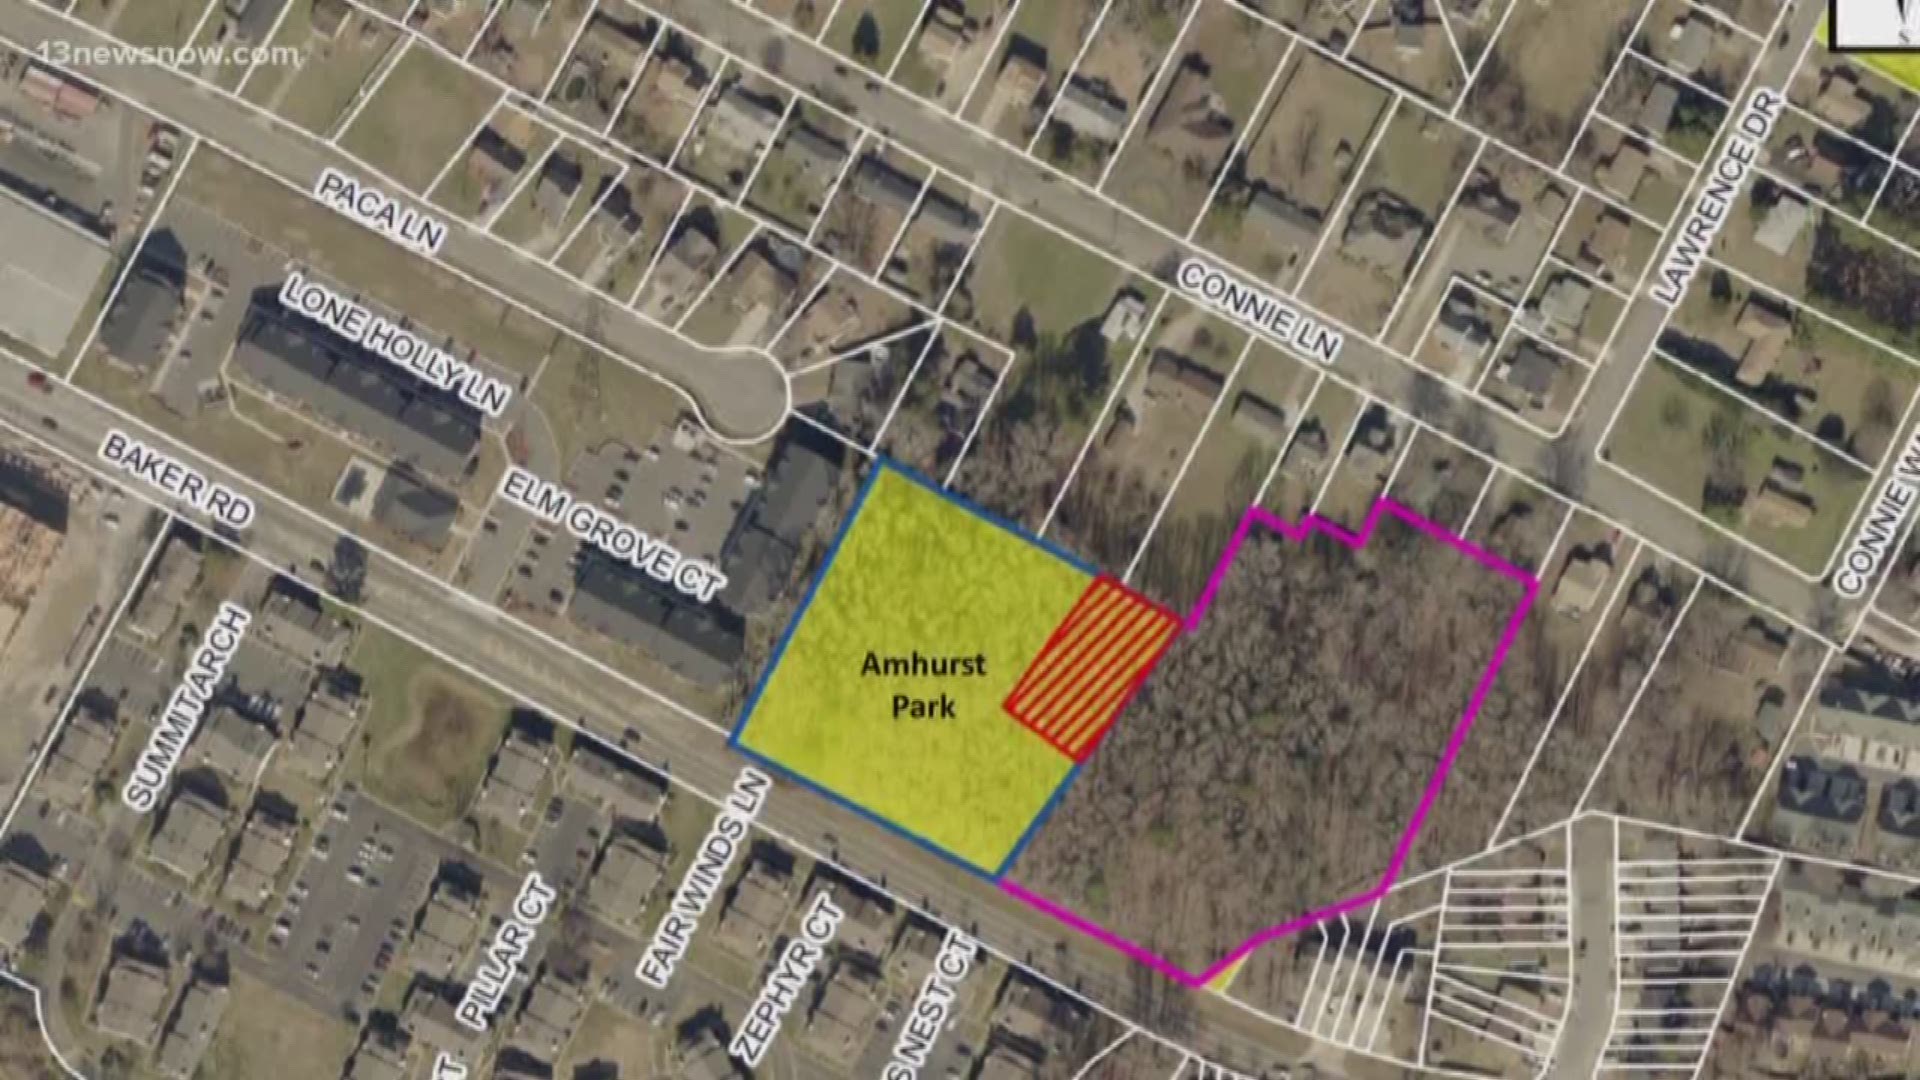 Virginia Beach city officials are considering selling a portion of Amhurst Park. Part of the park would be sold to a developer to build town homes. The proceeds would go towards developing the park.